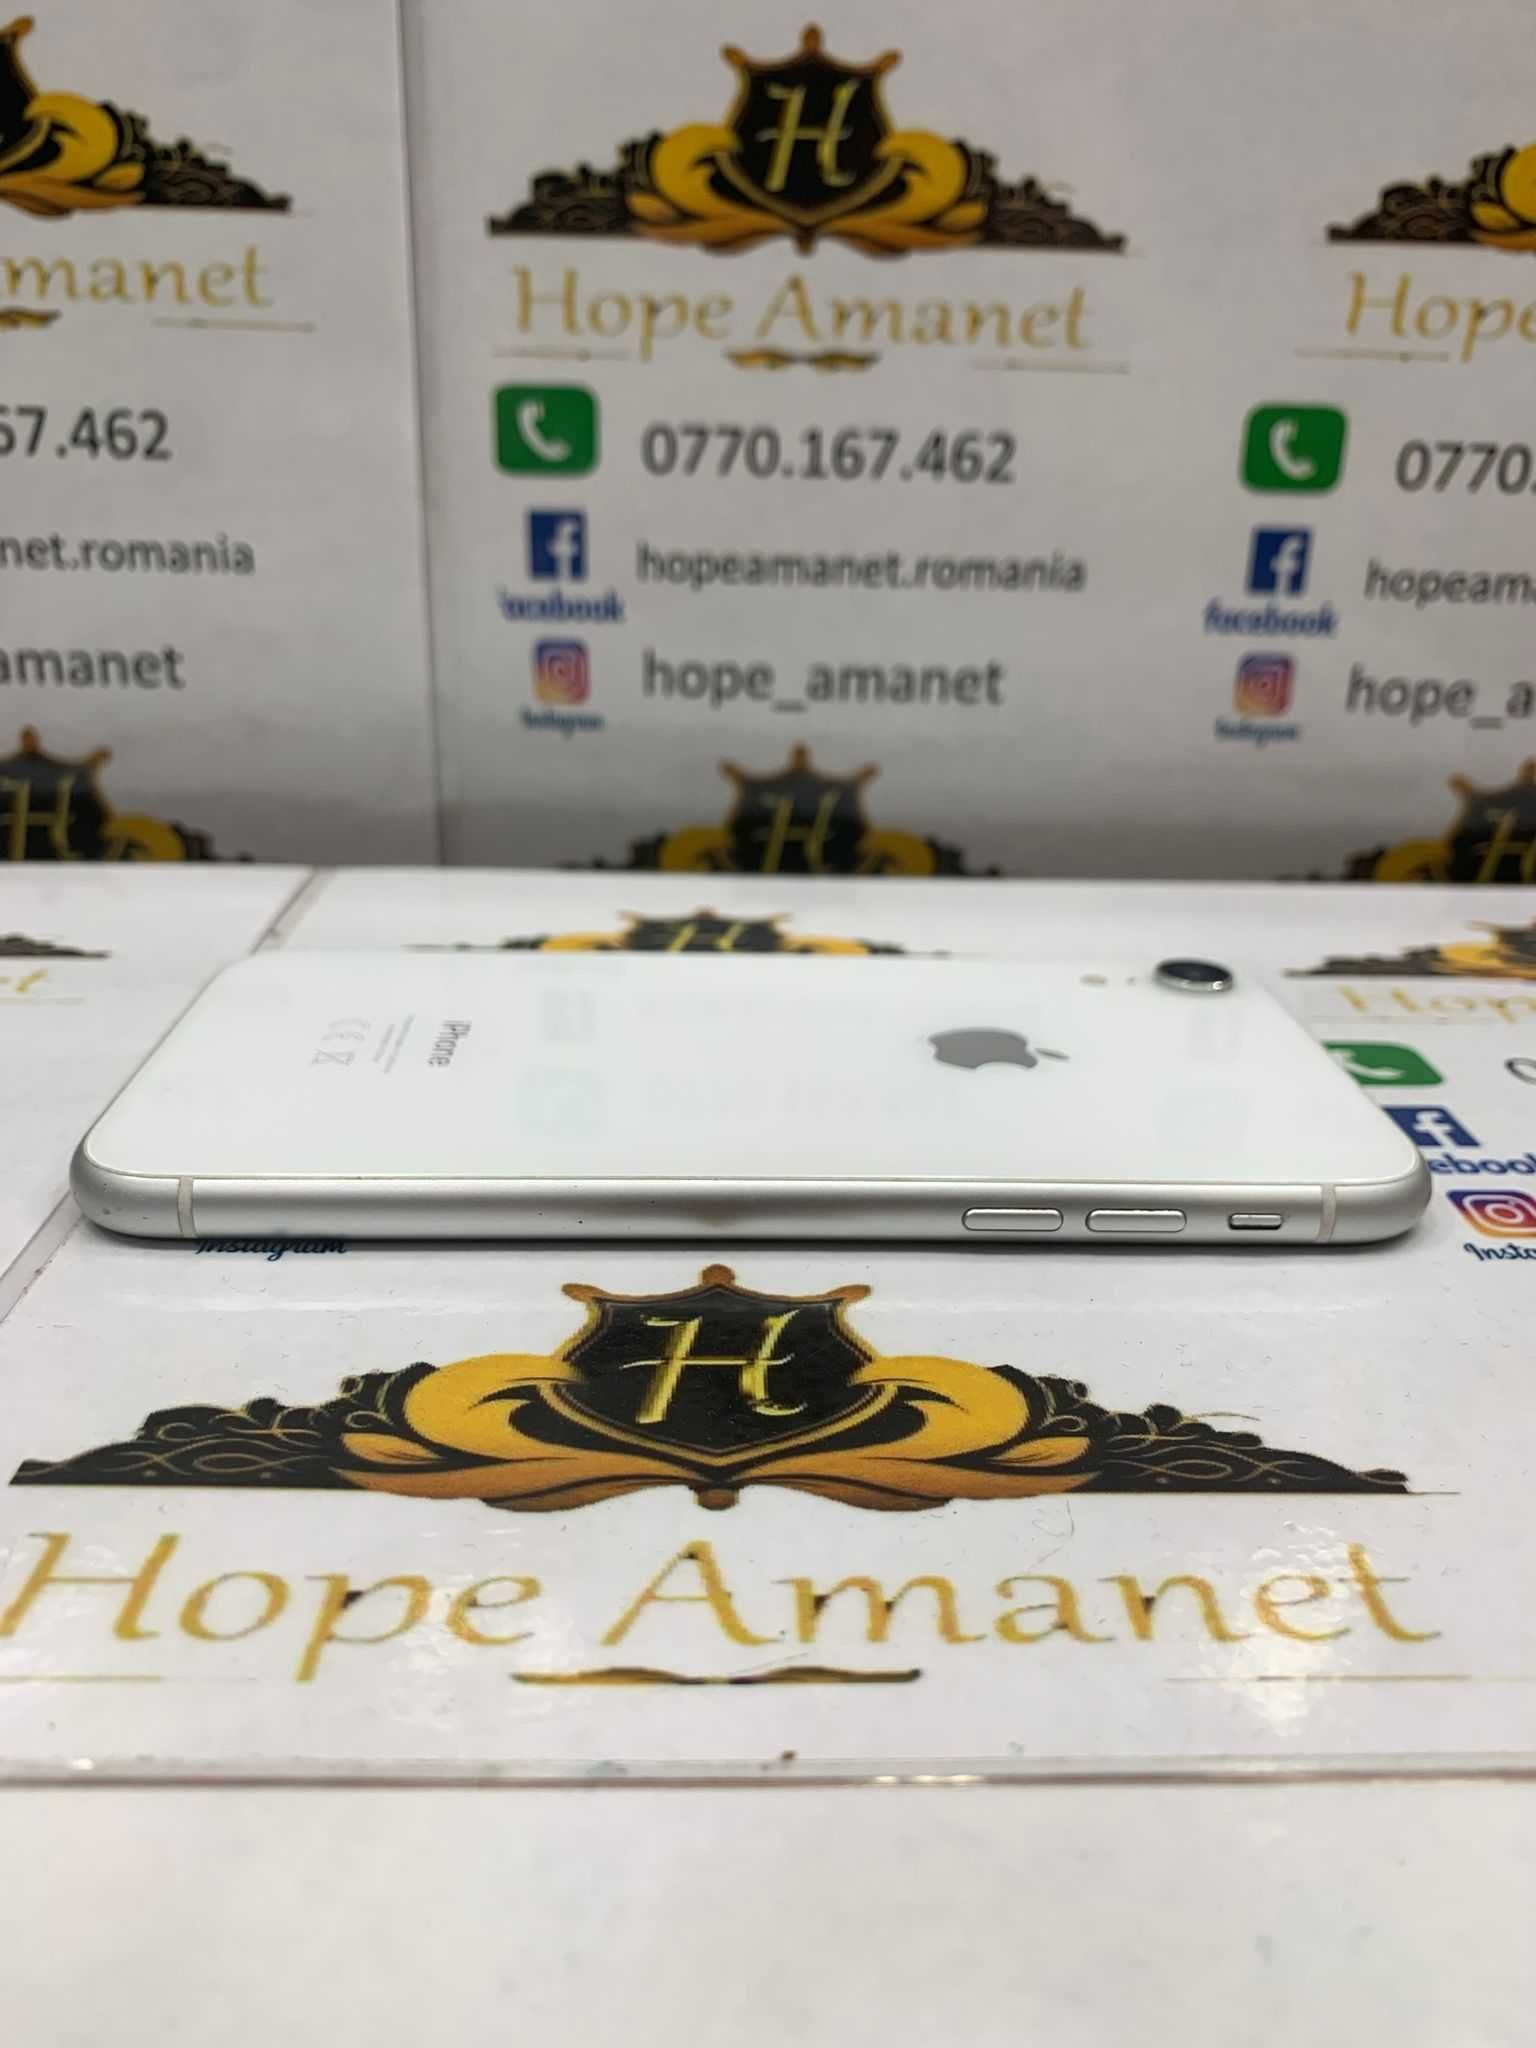 Hope Amanet P12 - Iphone XR / 64 GB / Baterie 81 % / White